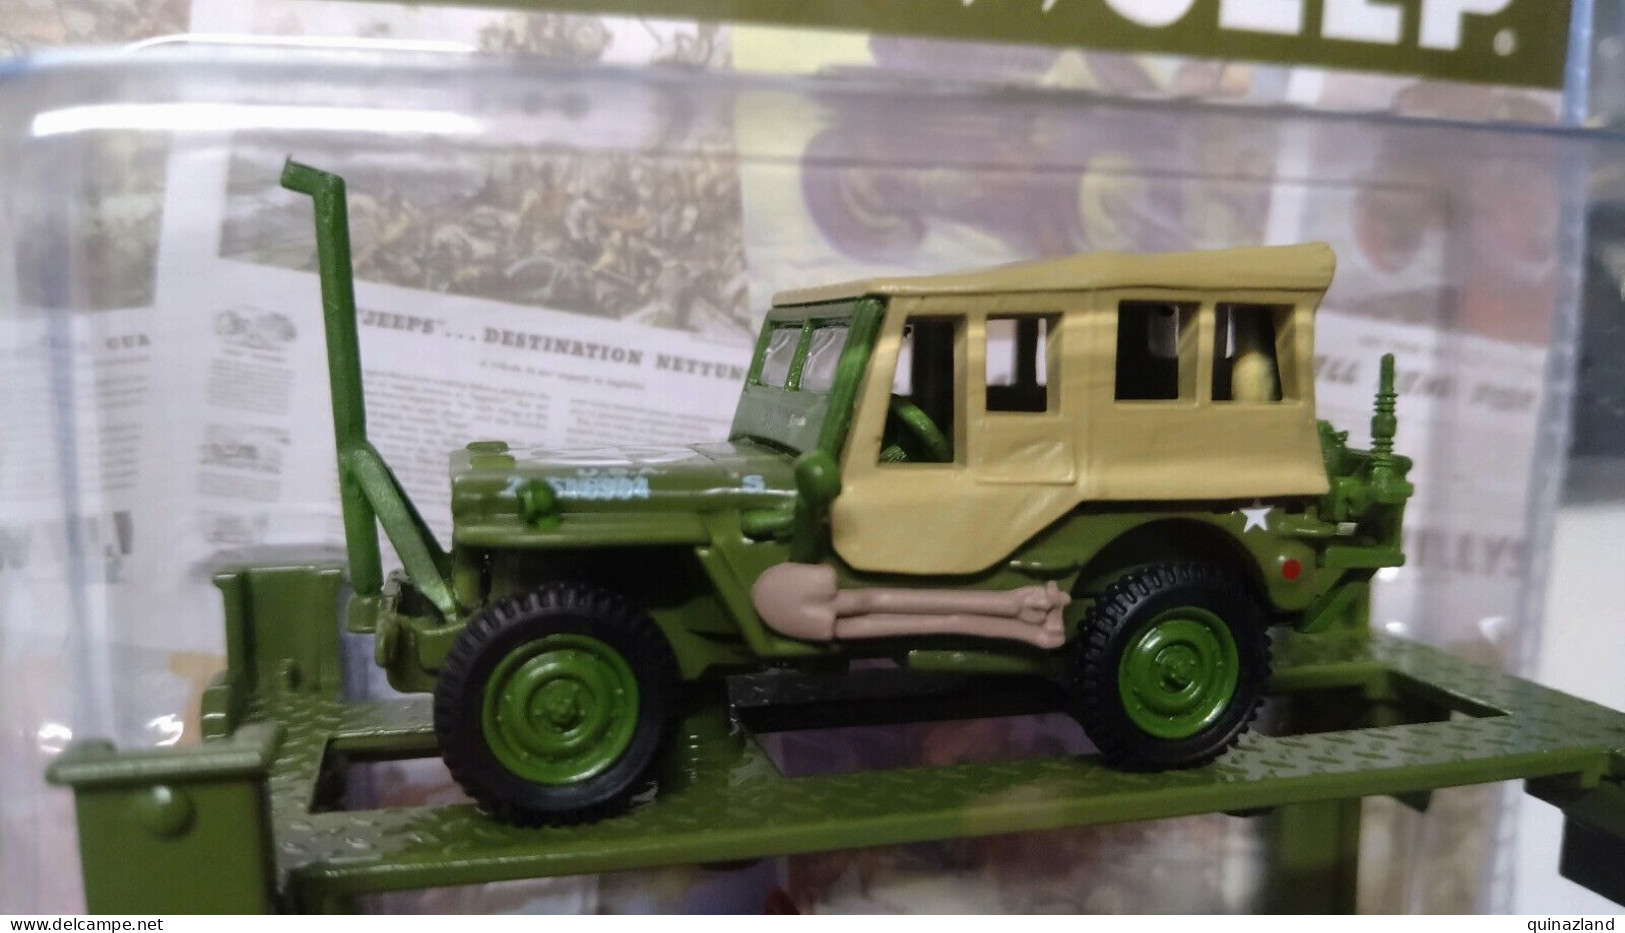 M2 Machines Auto-Lift Willy's Jeep 1944 Jeep MB (NG129) - Andere & Zonder Classificatie